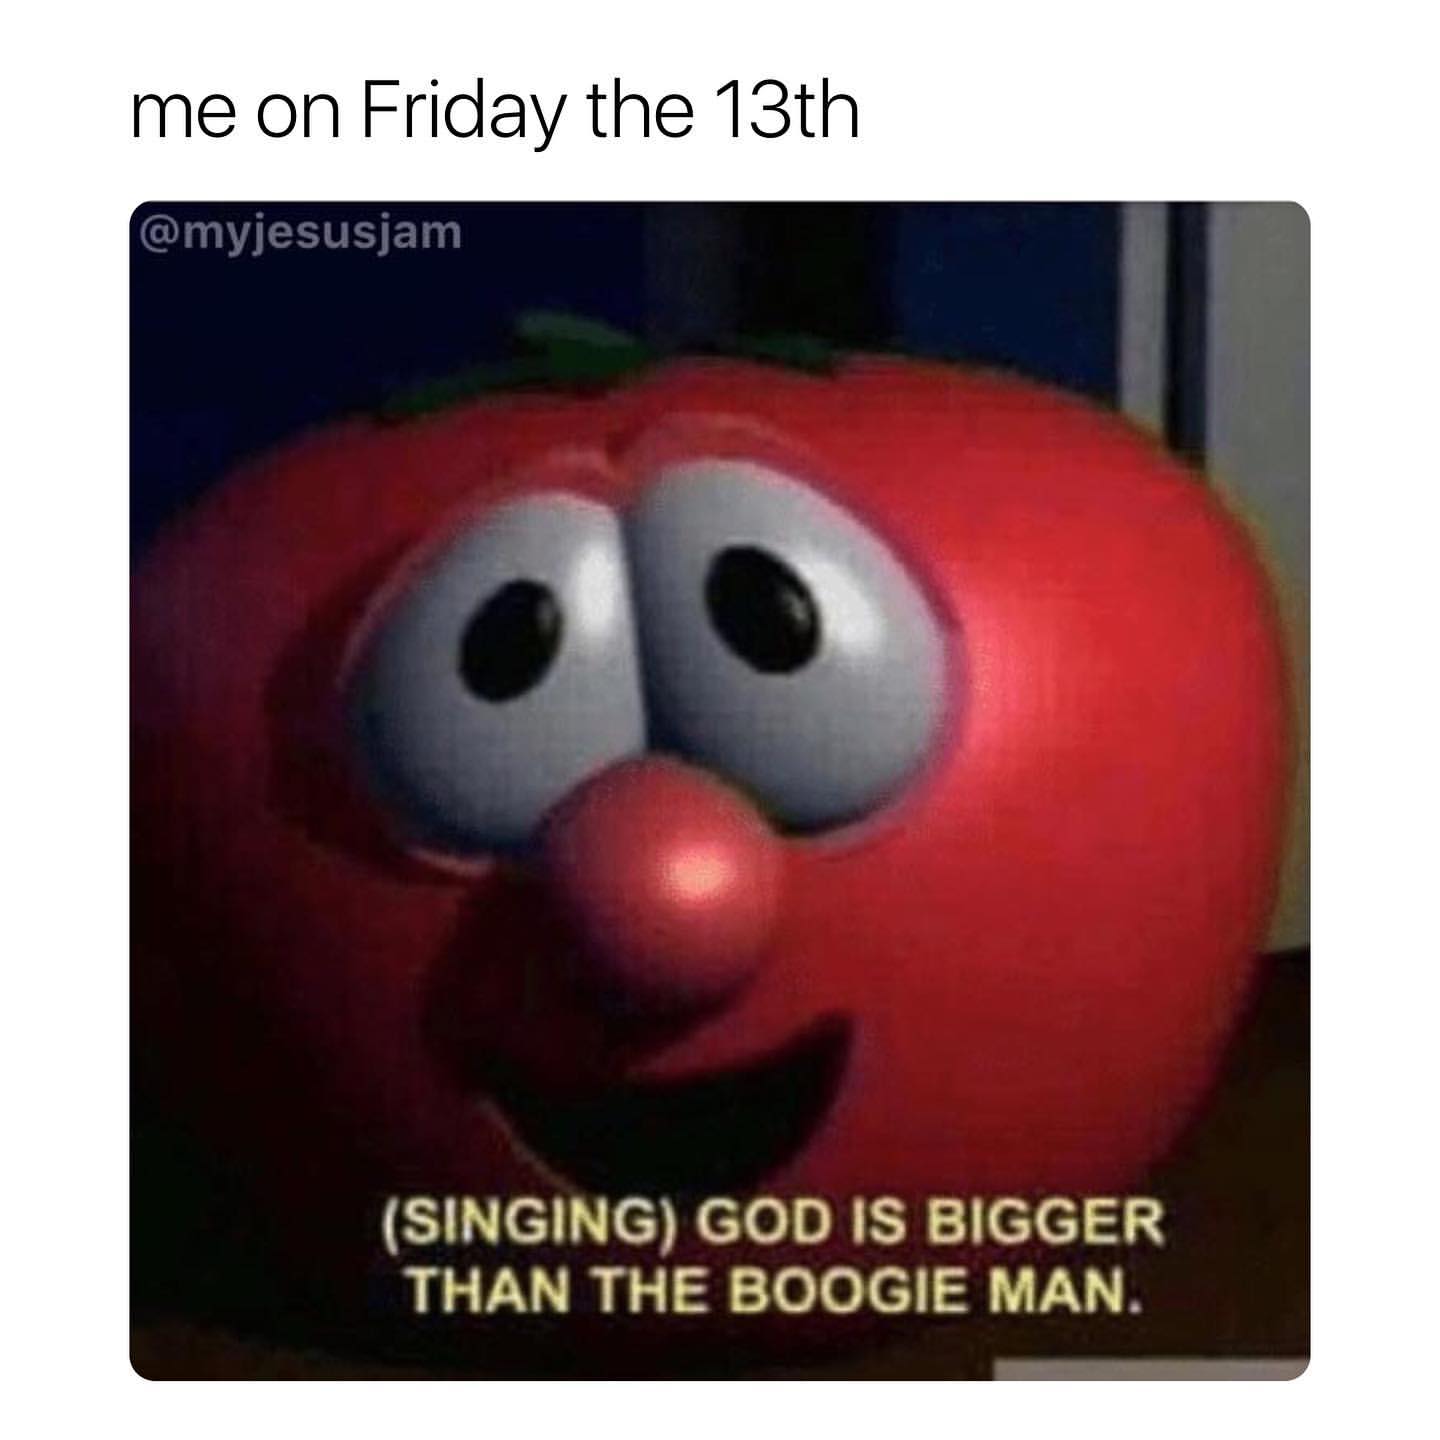 Me on Friday the 13th. (Singing) God is bigger than the boogie man.